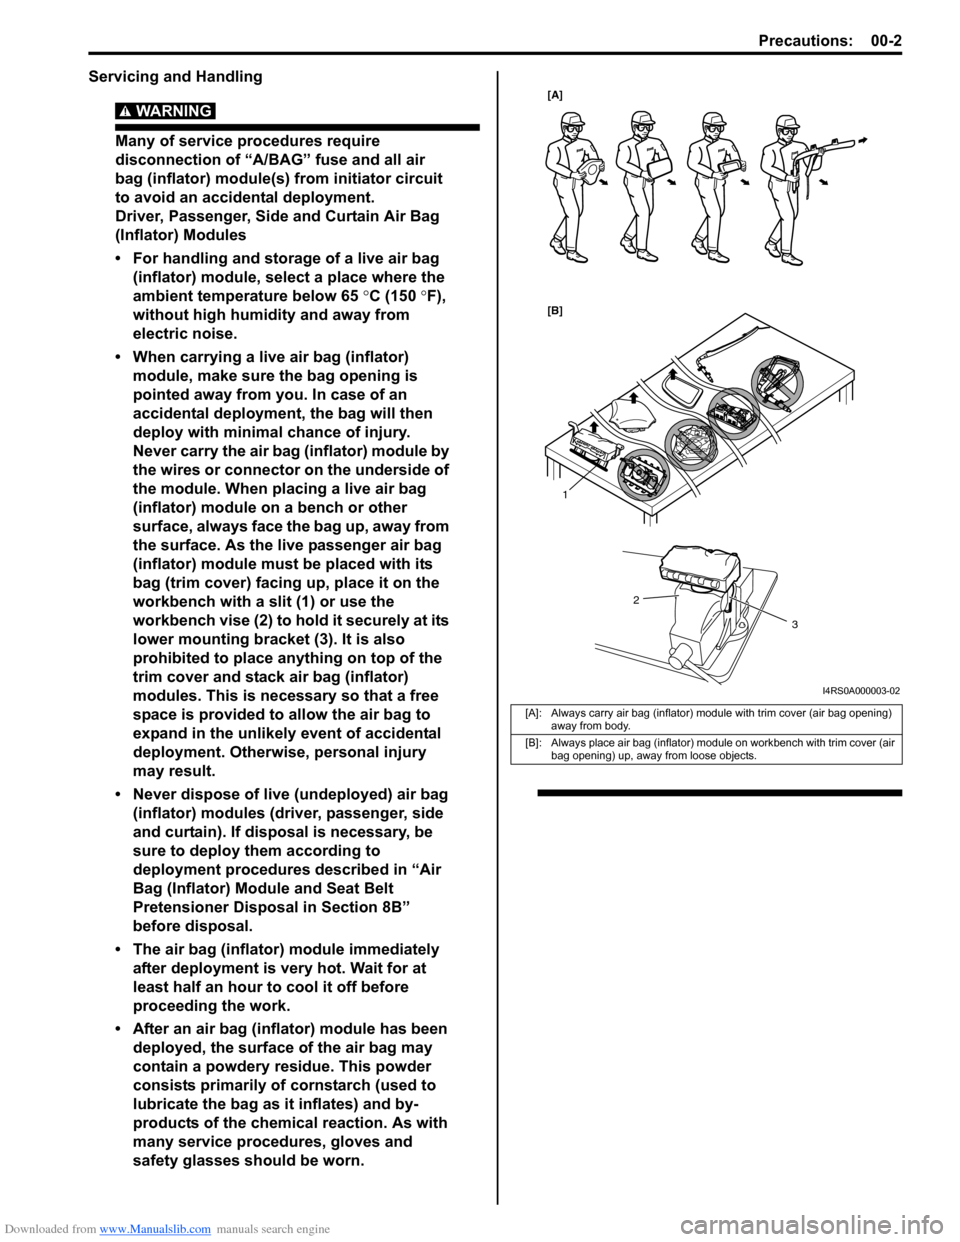 SUZUKI SWIFT 2005 2.G Service Workshop Manual Downloaded from www.Manualslib.com manuals search engine Precautions: 00-2
Servicing and Handling
WARNING! 
Many of service procedures require 
disconnection of “A/BAG” fuse and all air 
bag (infl